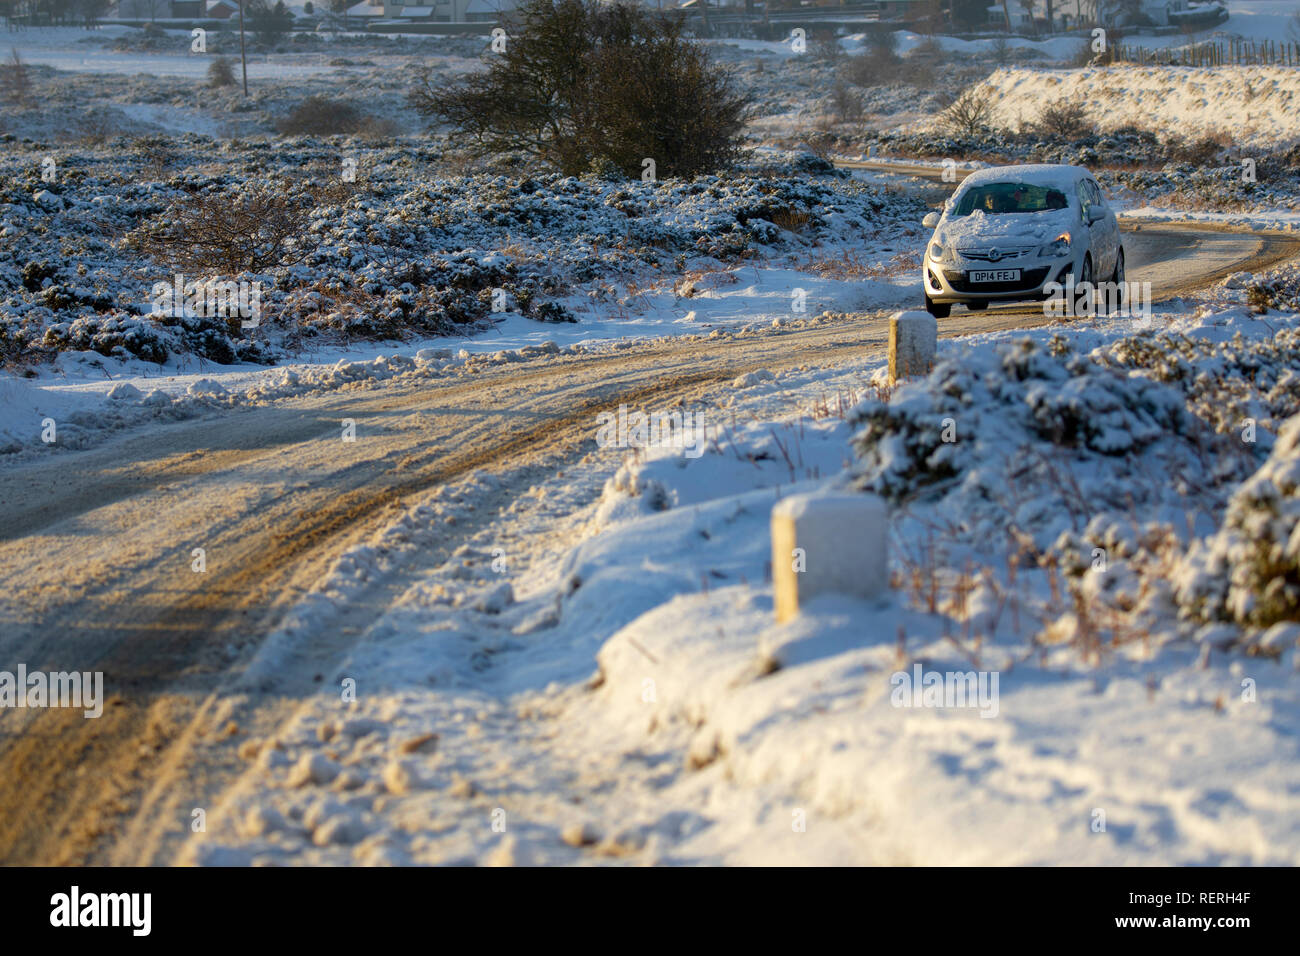 Flintshire, North Wales, UK. 23rd Jan, 2019. UK Weather: Heavy snowfall in North Wales with a Met Office Warning in place causing dangerous driving conditions and making it difficult to get out of rural villages in the area. A motorist travelling out of the Rhes-y-Cae village along a snow covered rural lane after heavy overnight snow, Flintshire, Wales Credit: DGDImages/Alamy Live News Stock Photo